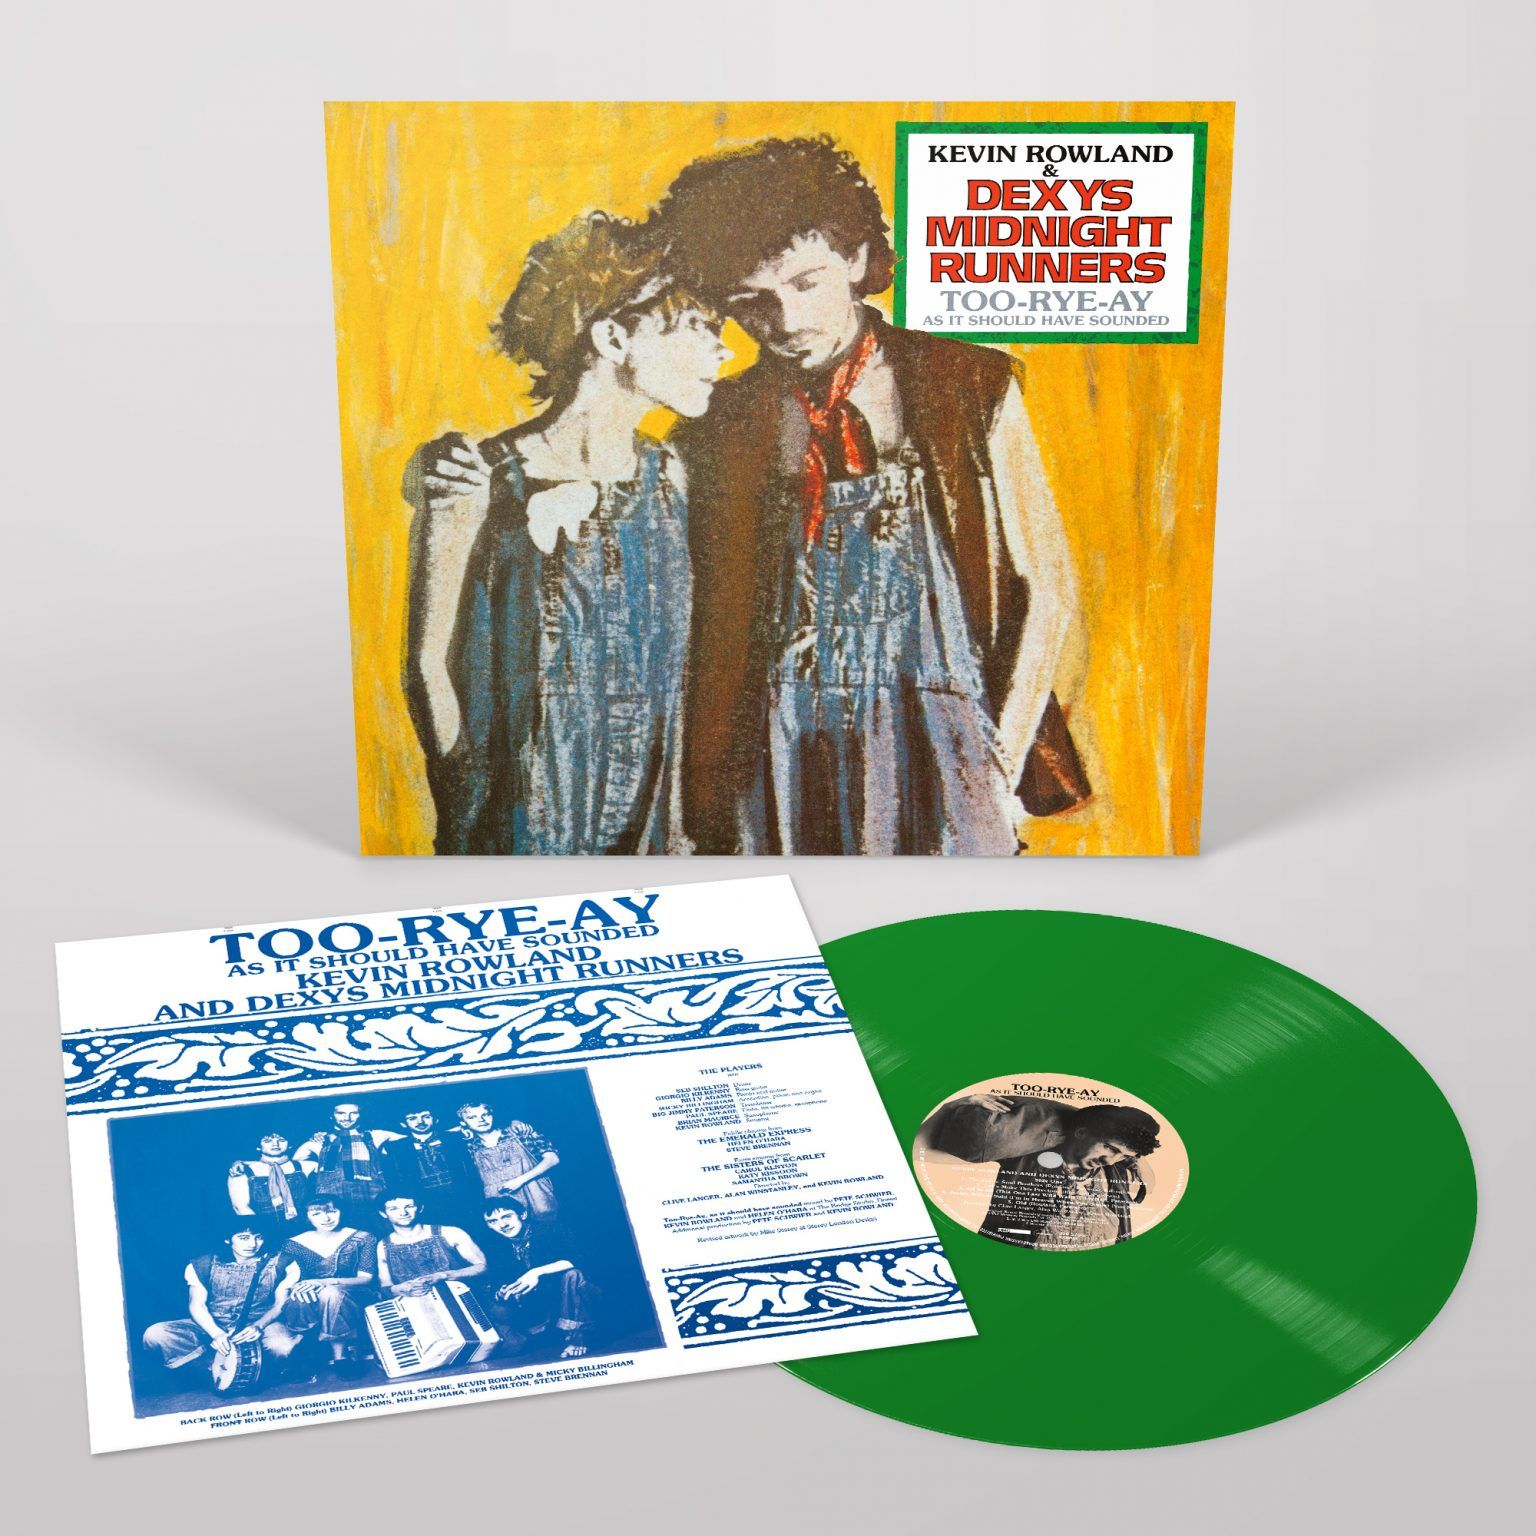 Kevin Rowland and Dexys Midnight Runners Too-Rye-Ay Limited Edition 3D